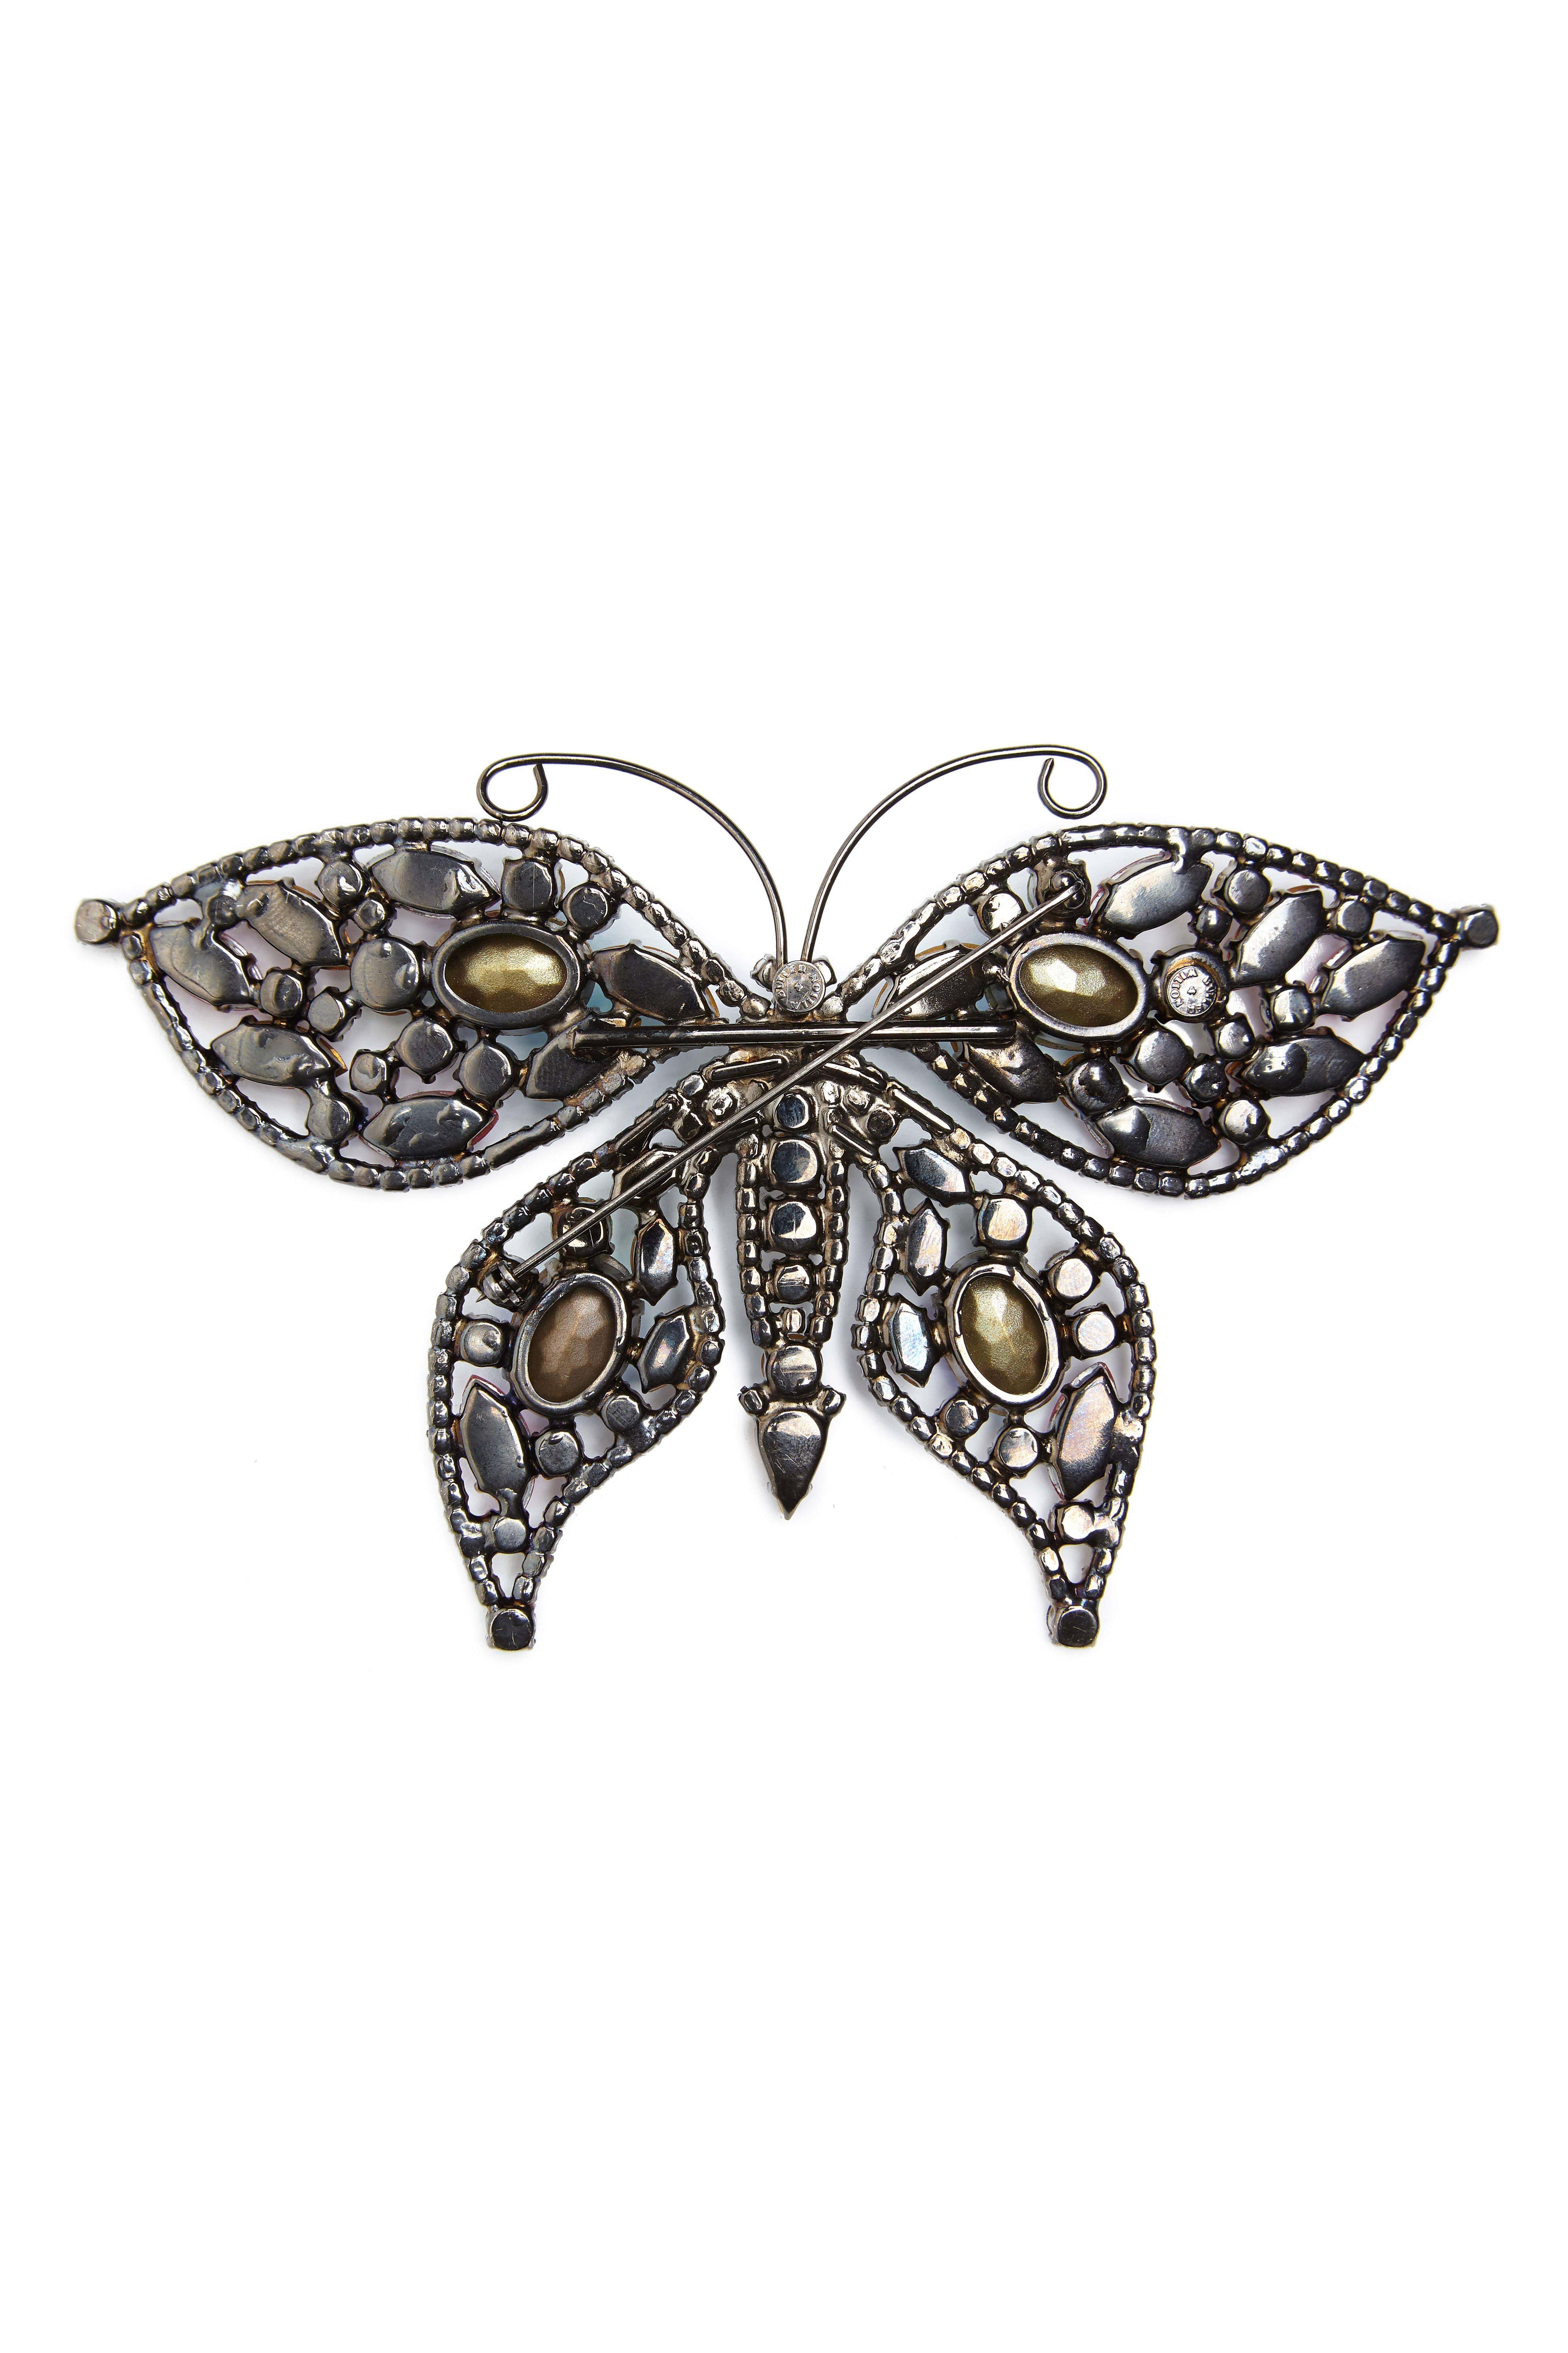 1980s Butler and Wilson giant Swarovski multicoloured crystal butterfly brooch. This is an original, collectable and early design that is entirely prong set with a variety of classic facet shaped and moulded iridescent stones and has a thick gun